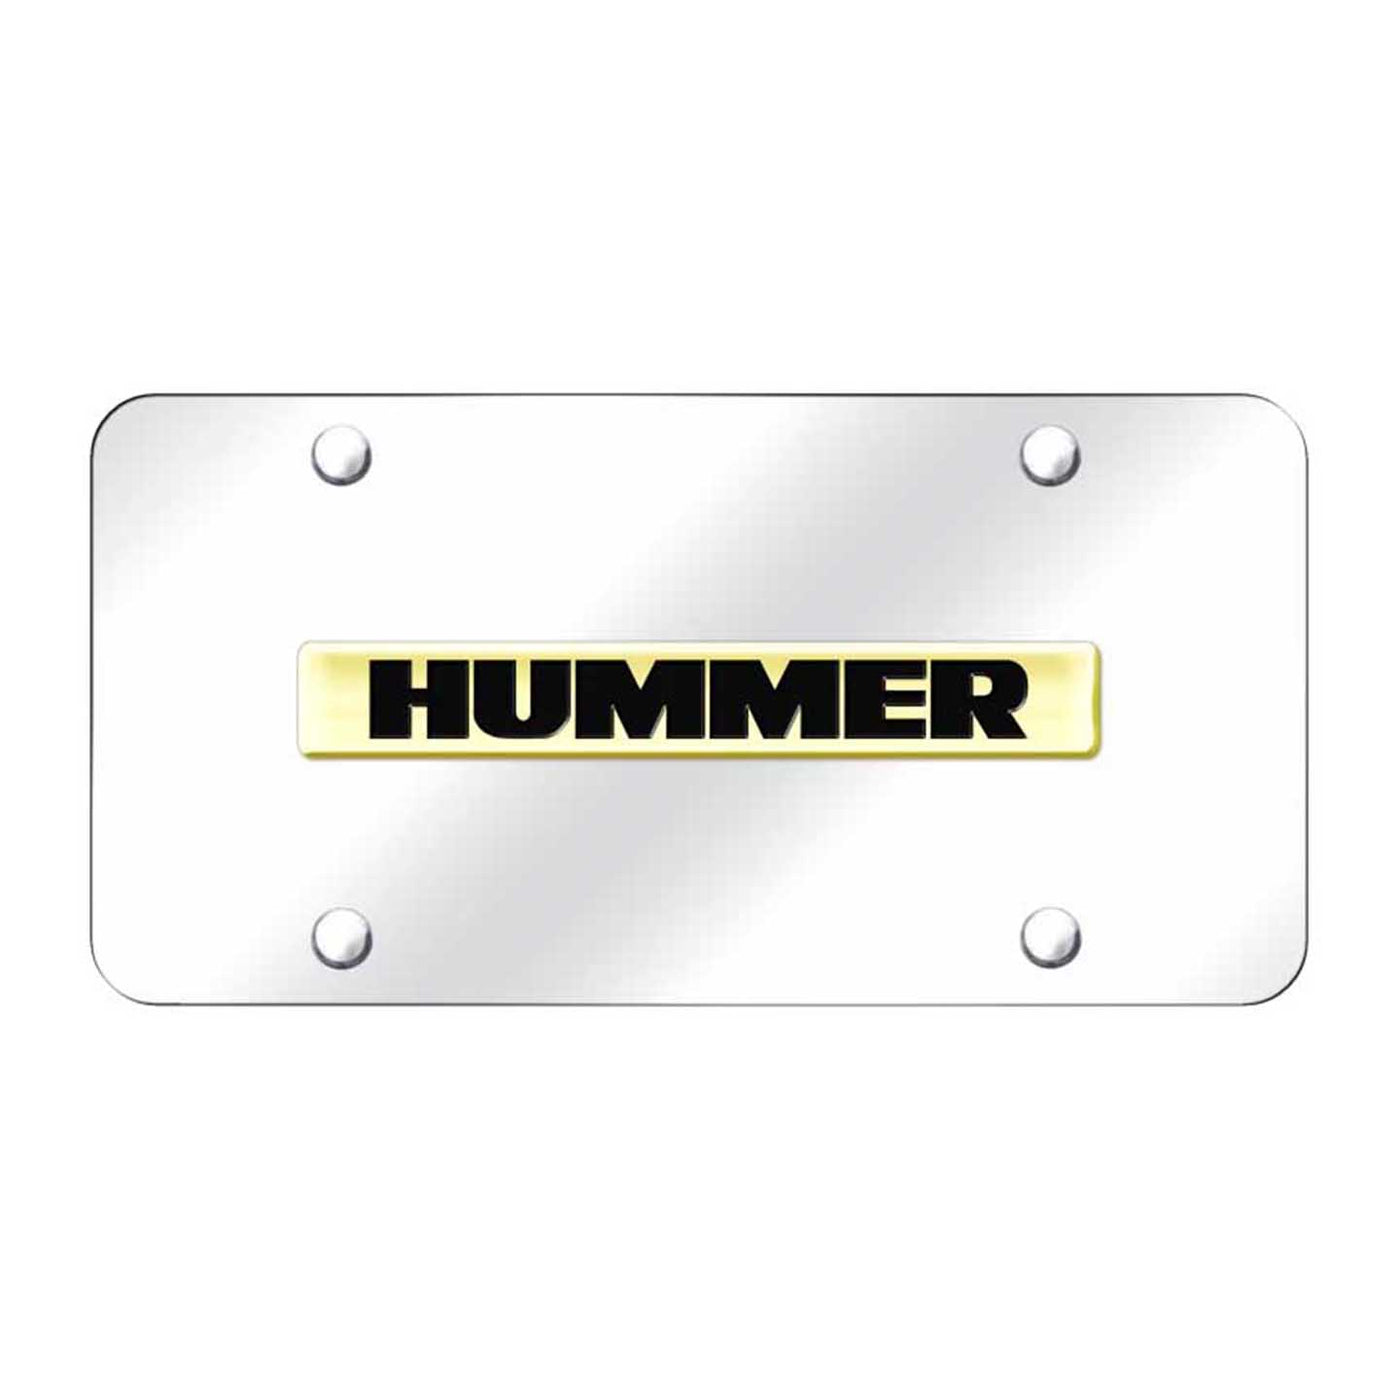 Hummer Name License Plate - Gold on Mirrored